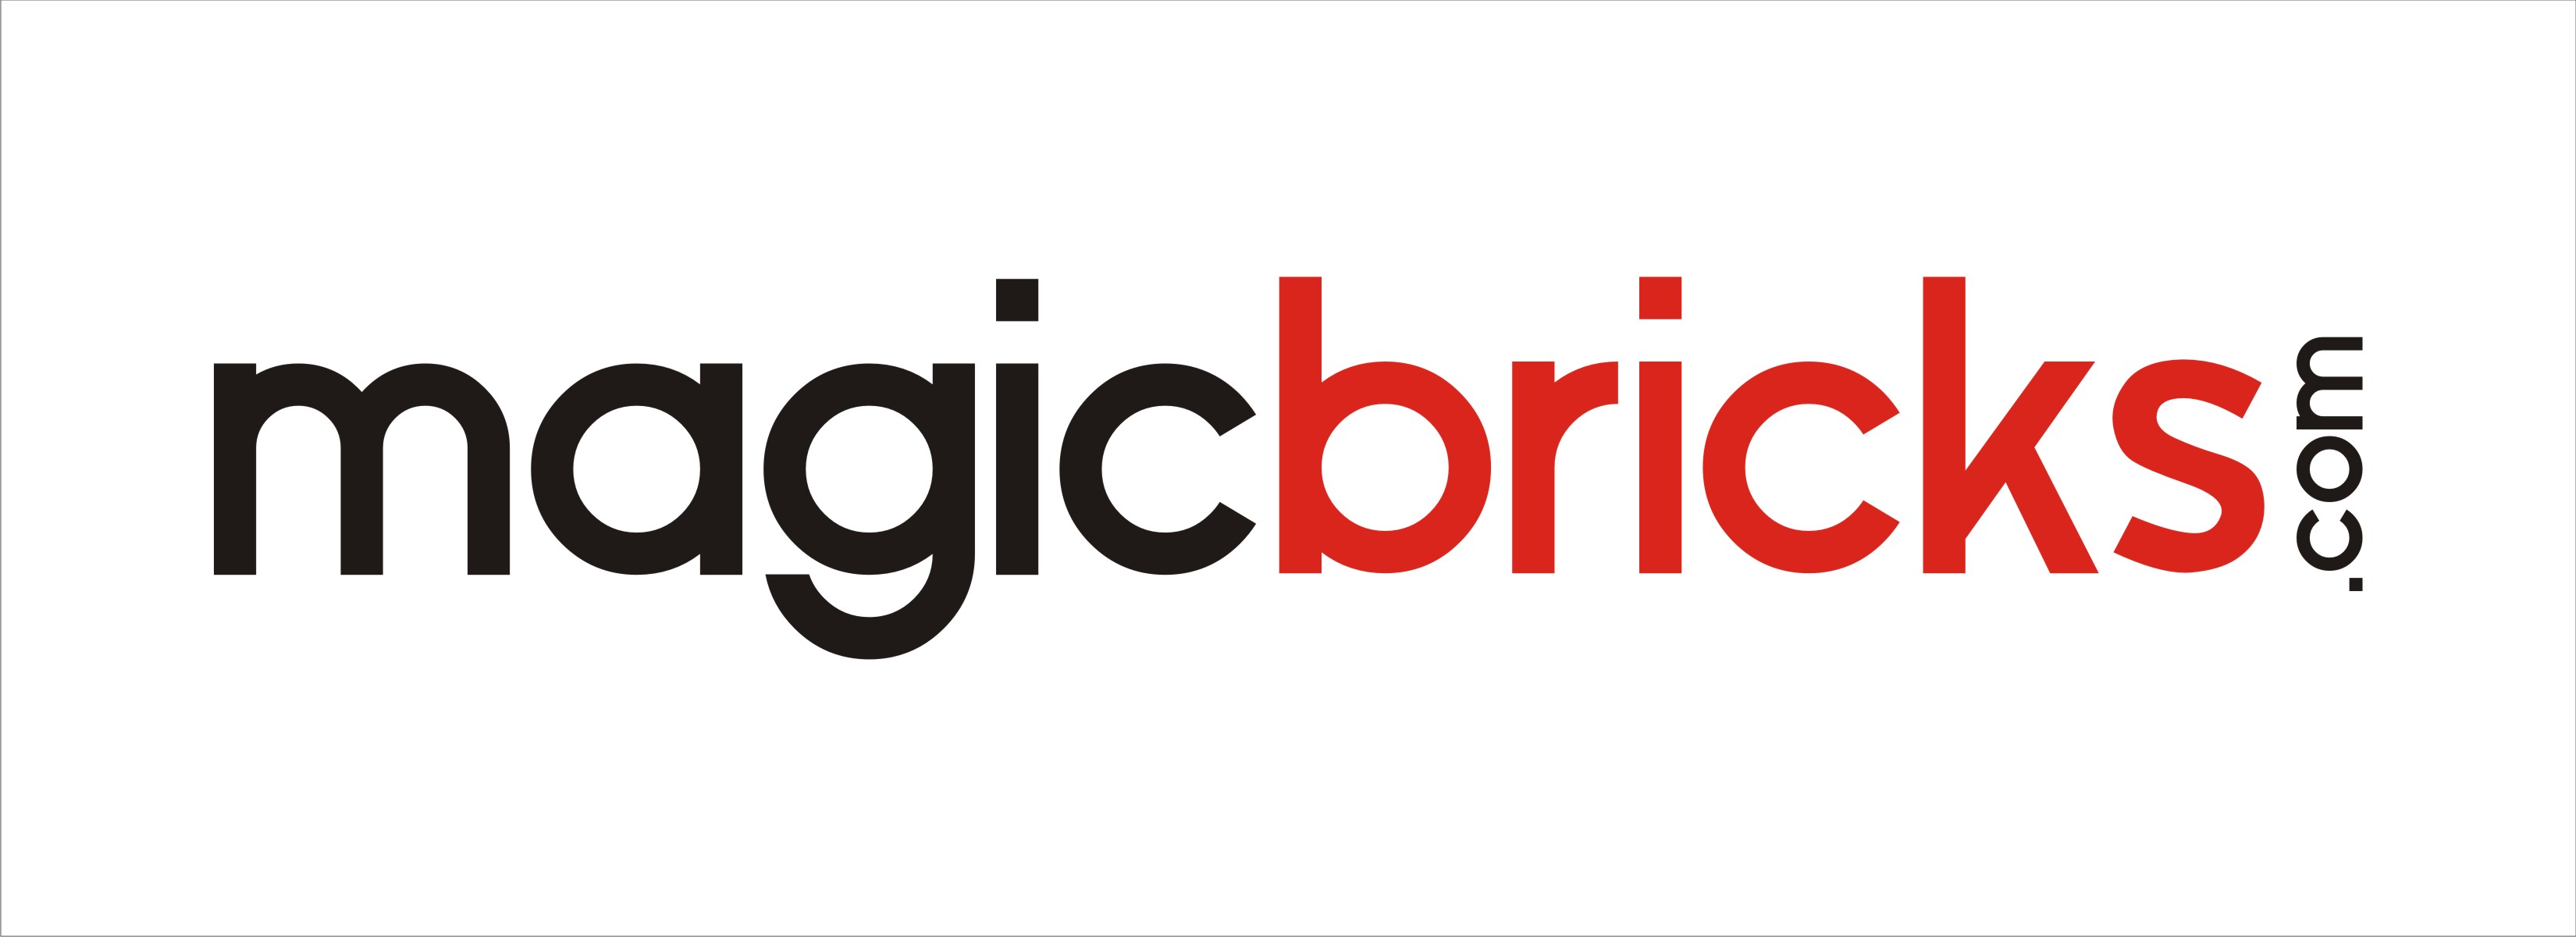 Magicbricks Logo, Online property portal, Property search online, e-auction, India real estate news, Indian property market, NRI investment, Track2Realty